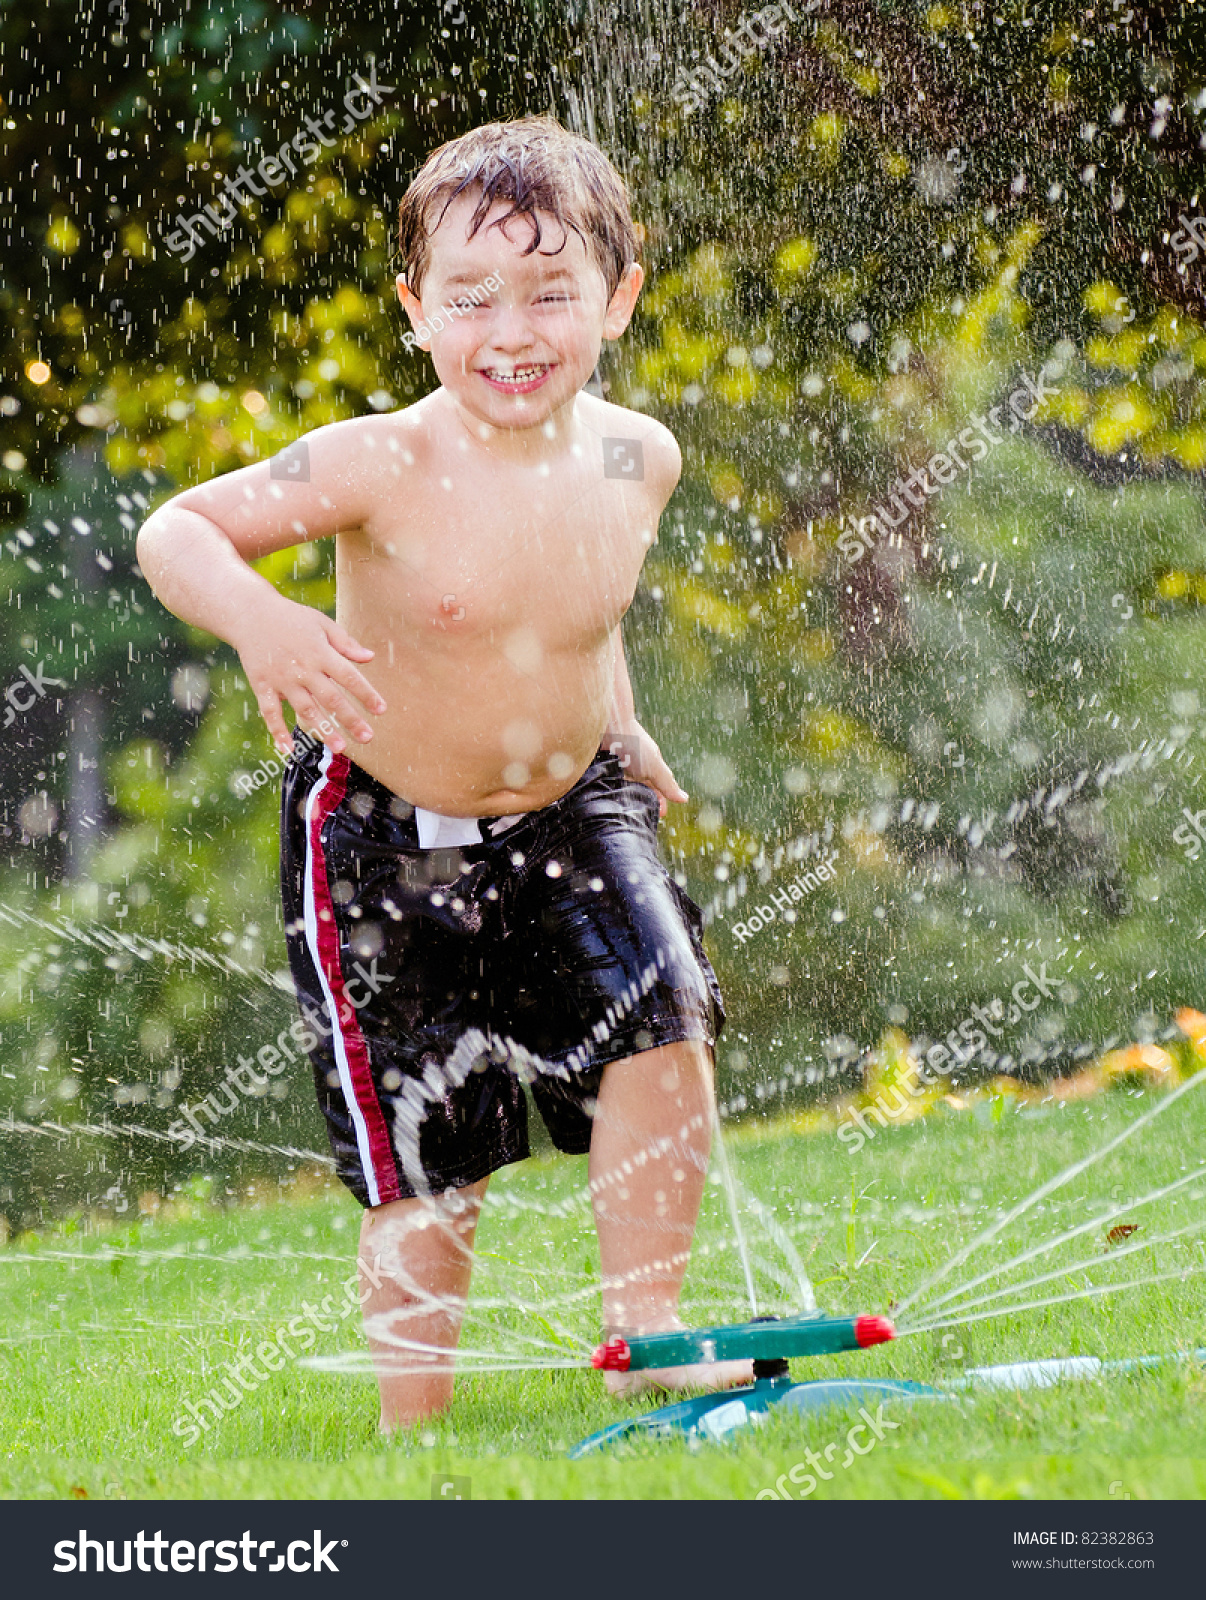 Young Boy Or Kid Cools Off By Playing In Water Sprinkler At Home In His ...